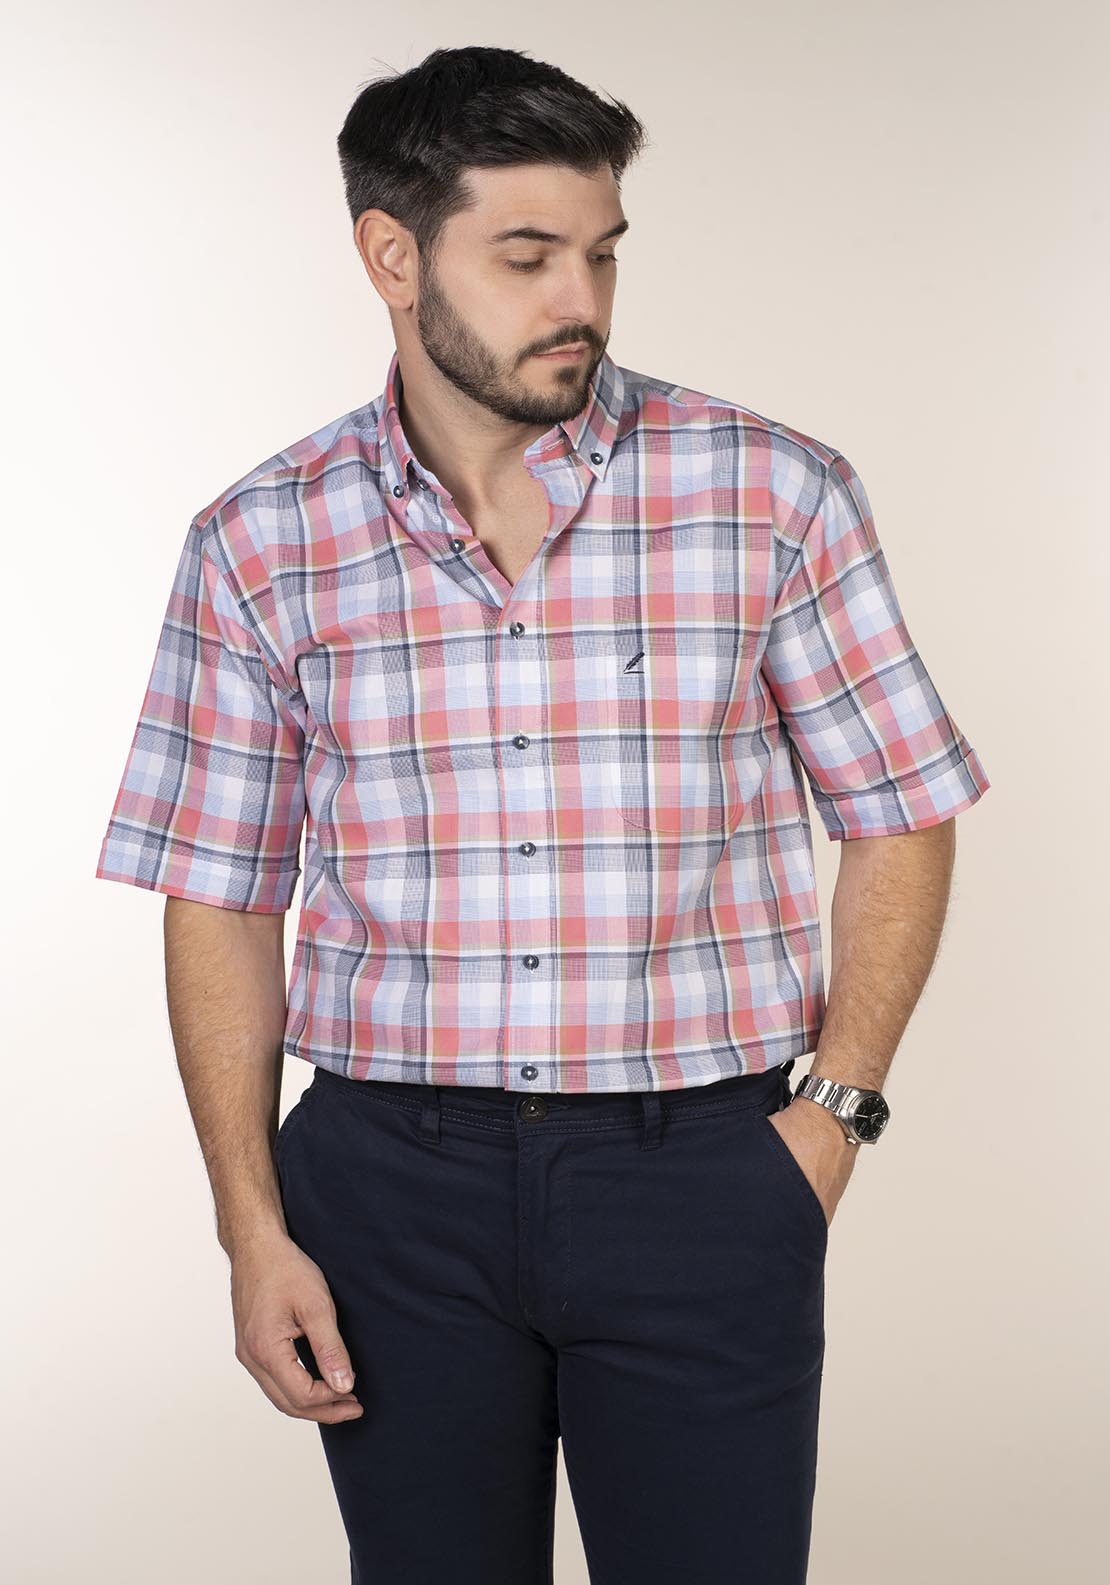 Yeats Casual Check Short Sleeve Shirt - Pink 2 Shaws Department Stores